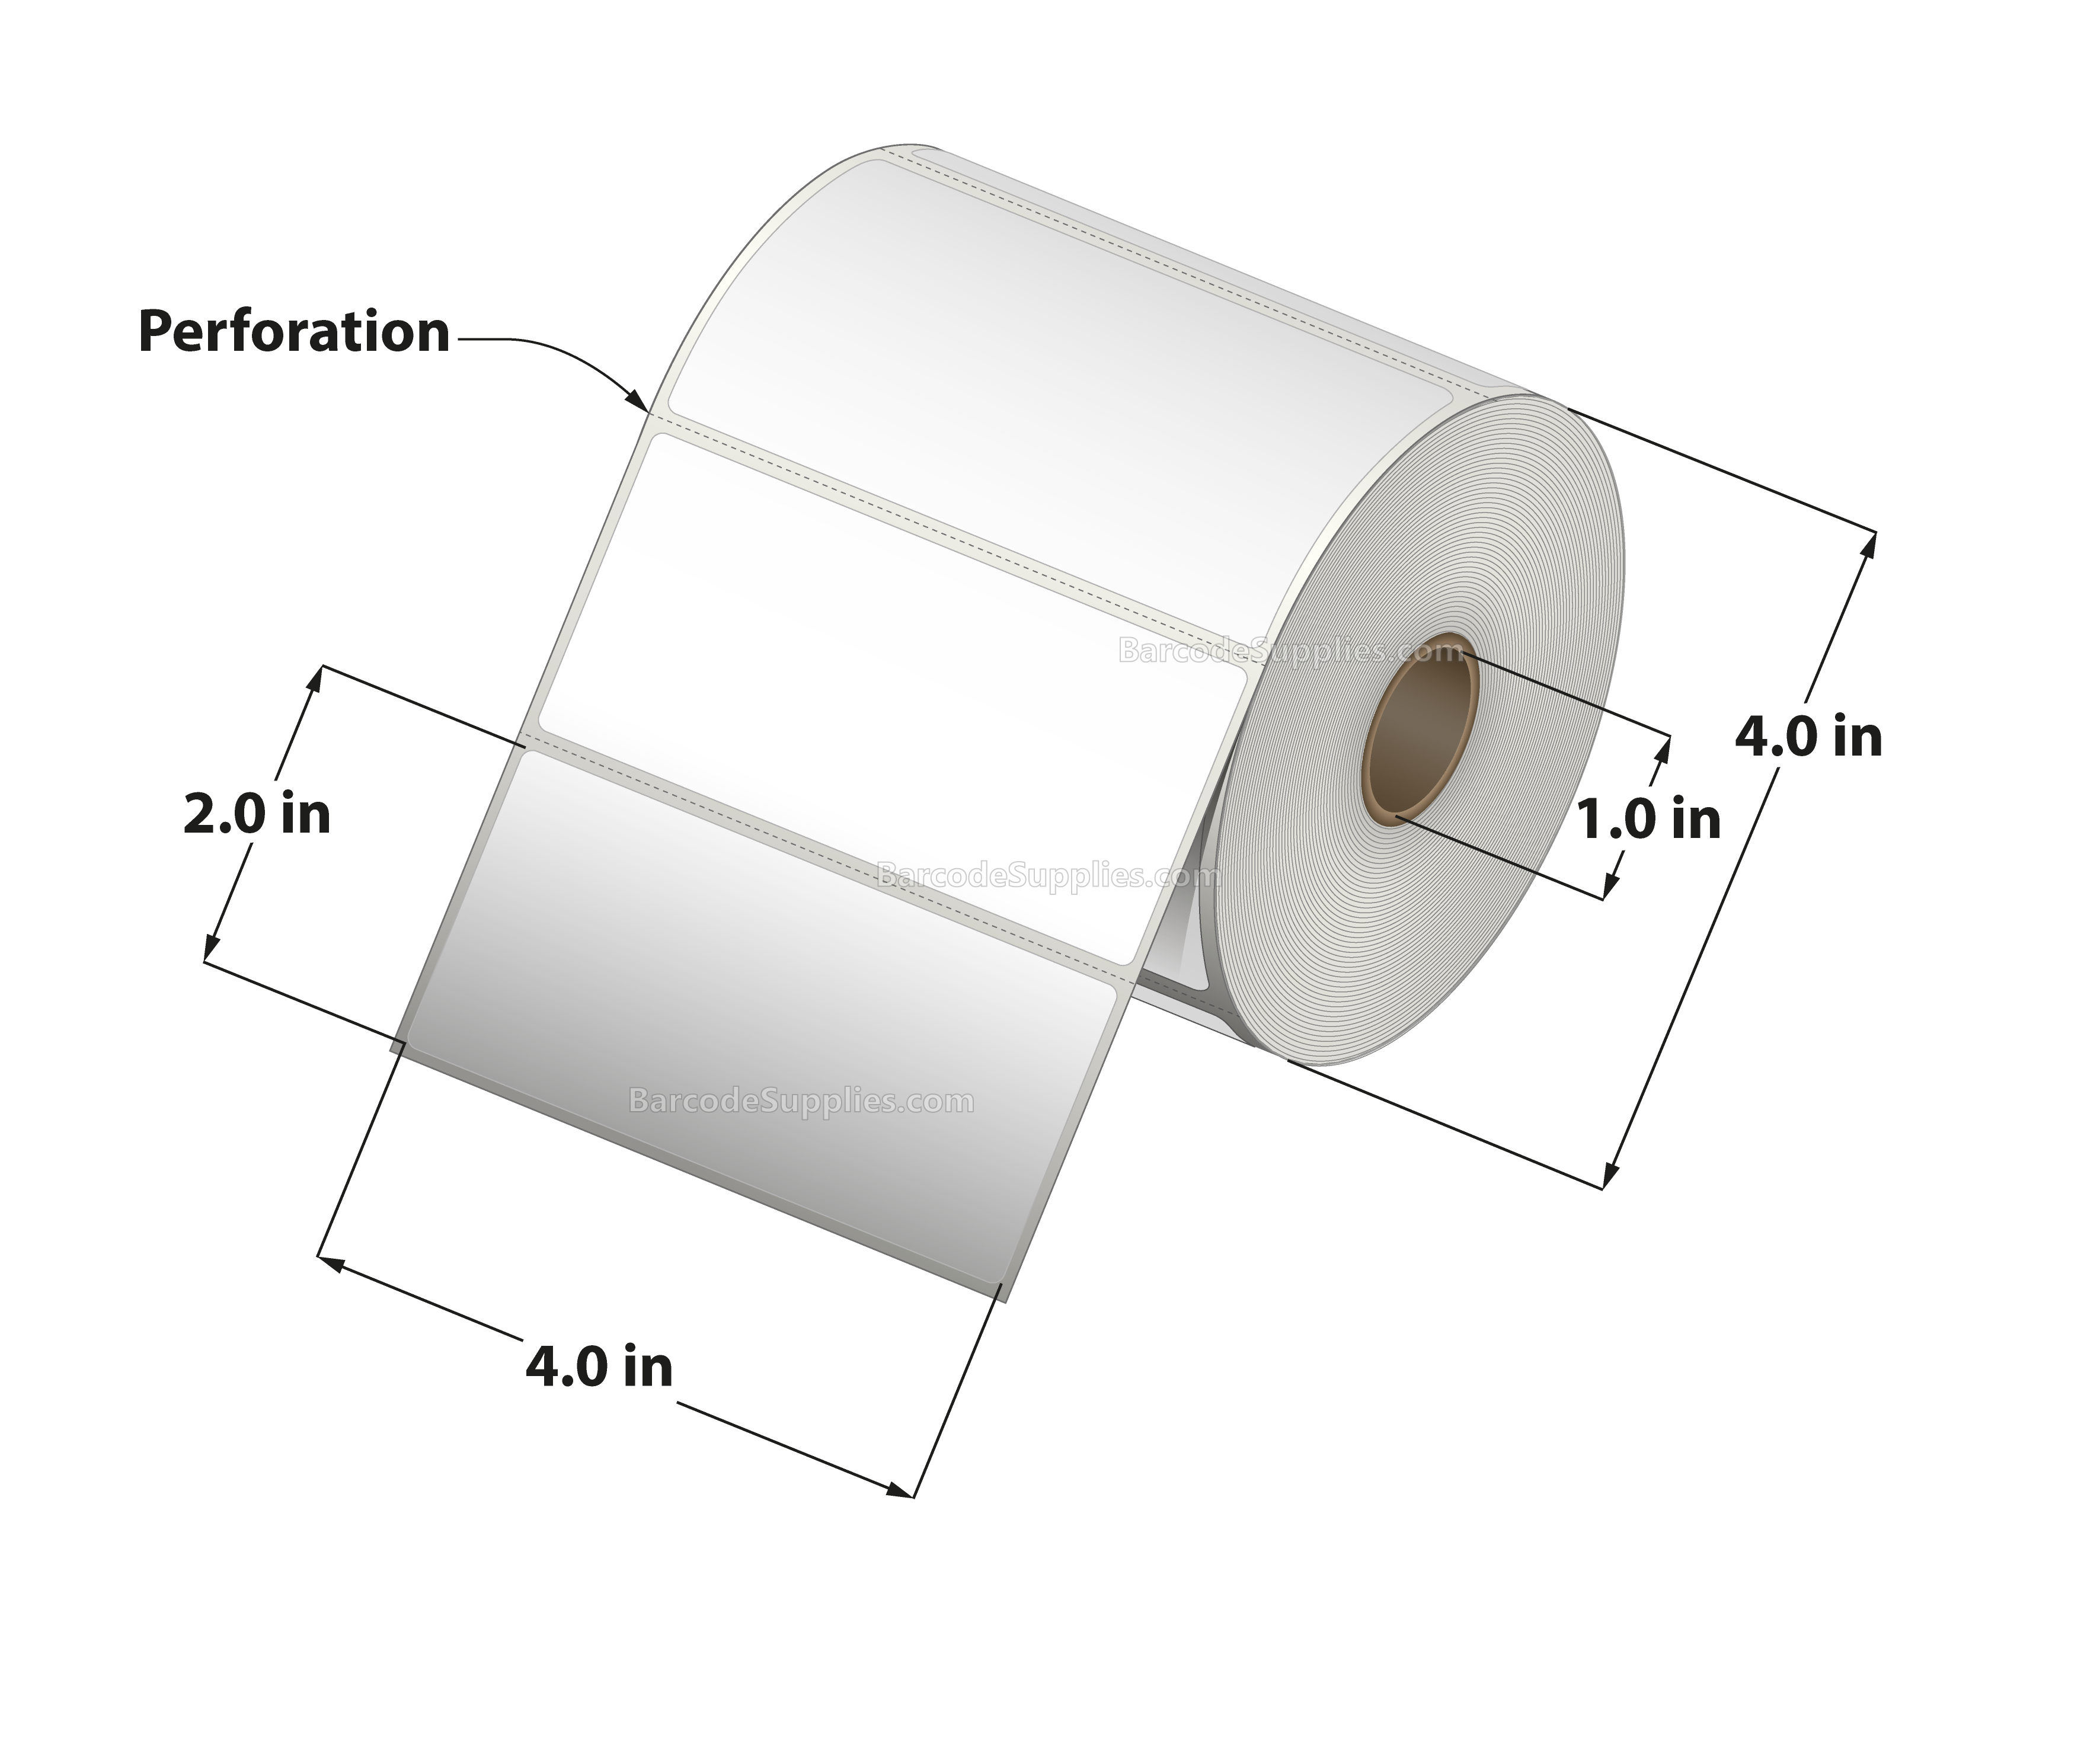 4 x 2 Direct Thermal White Labels With Acrylic Adhesive - Perforated - 735 Labels Per Roll - Carton Of 12 Rolls - 8820 Labels Total - MPN: RD-4-2-735-1 - BarcodeSource, Inc.